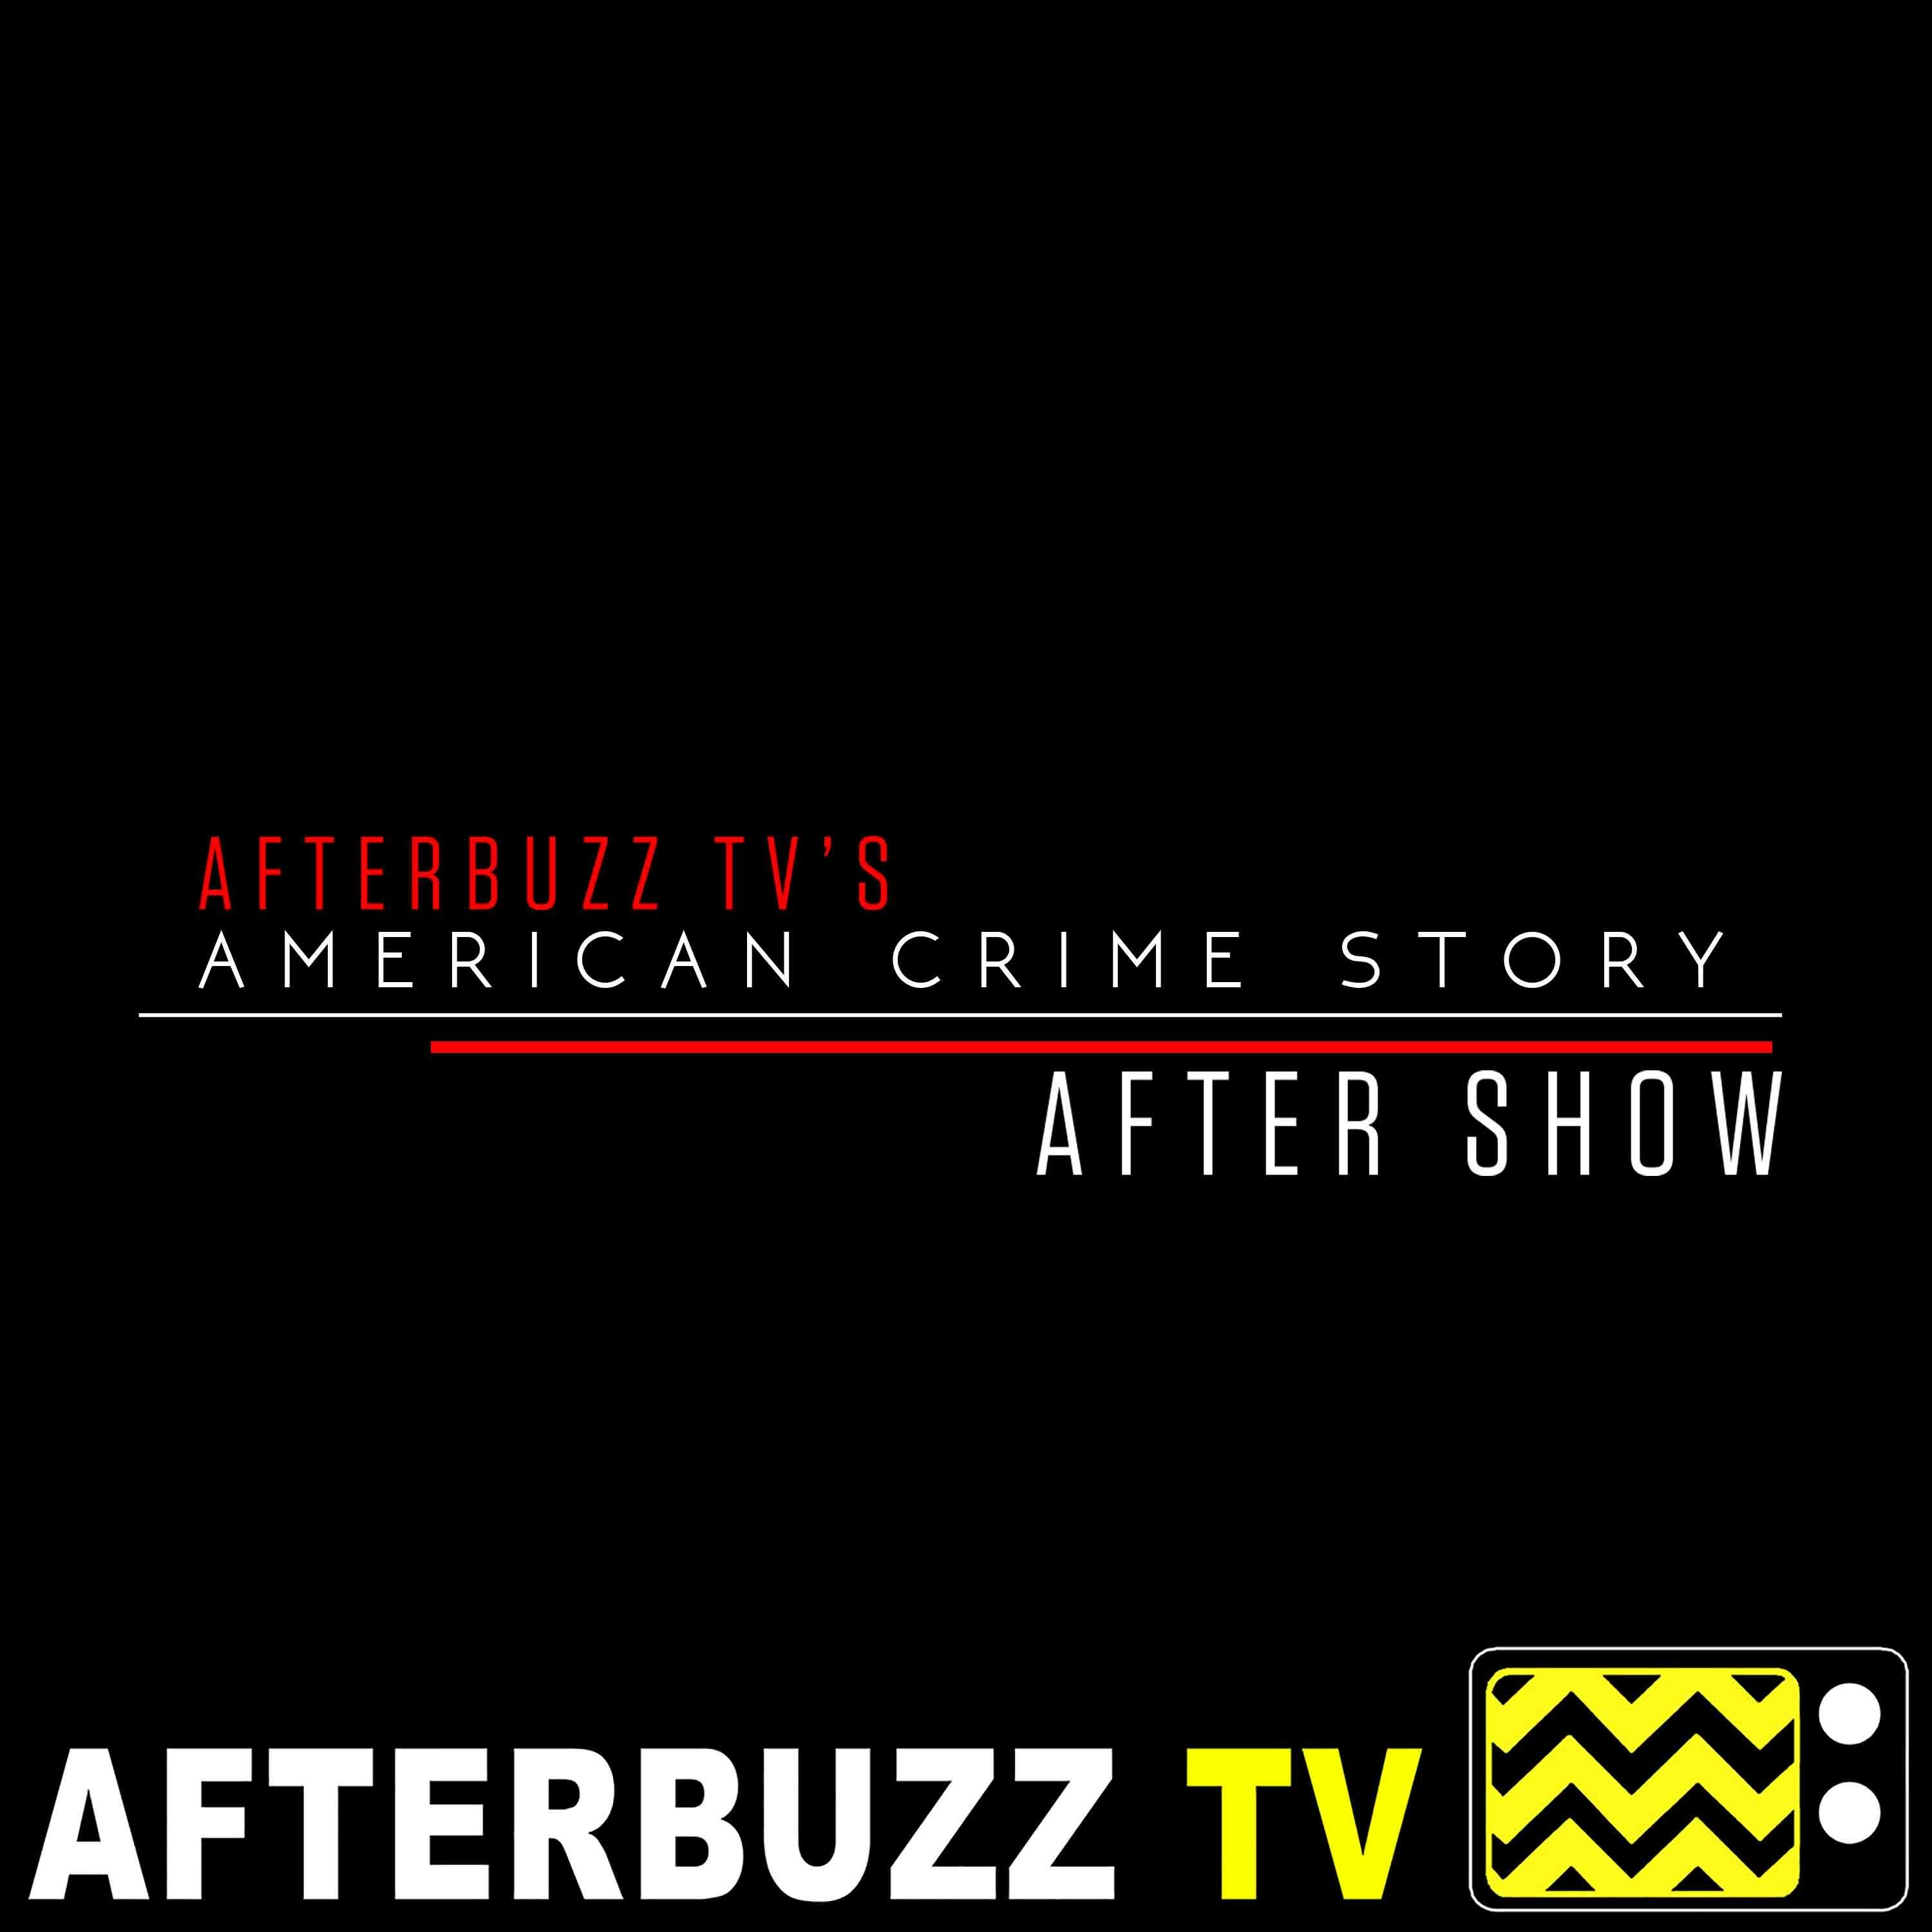 The People vs OJ Simpson | From the Ashes of Tragedy E:1 | AfterBuzz TV AfterShow